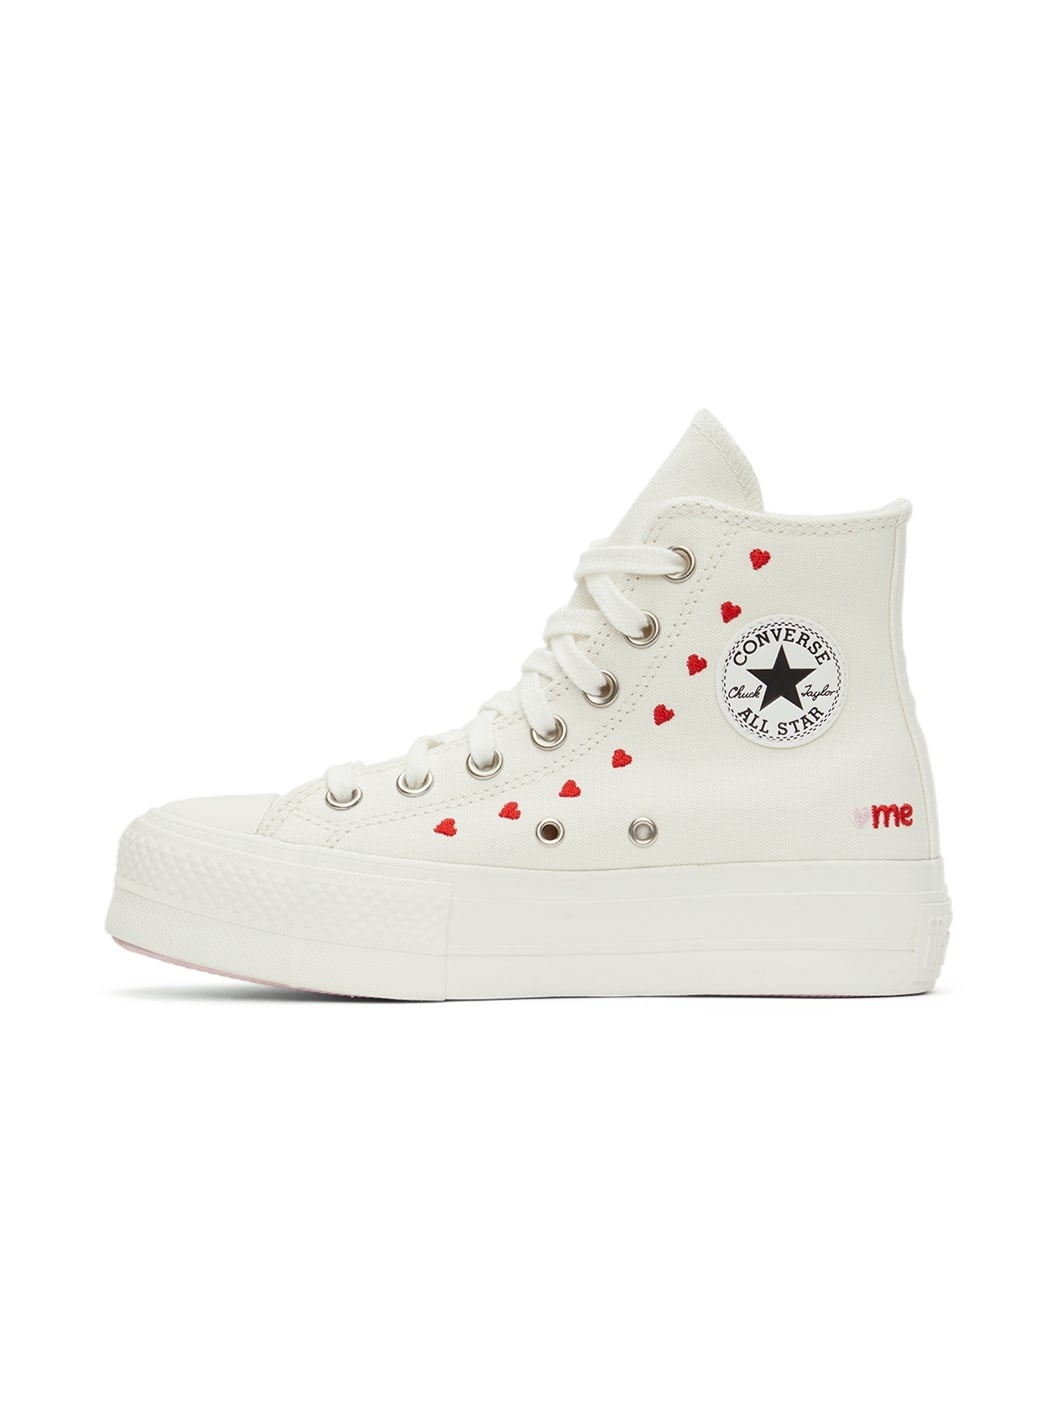 White Chuck Taylor All Star Lift High Top Sneakers - 3